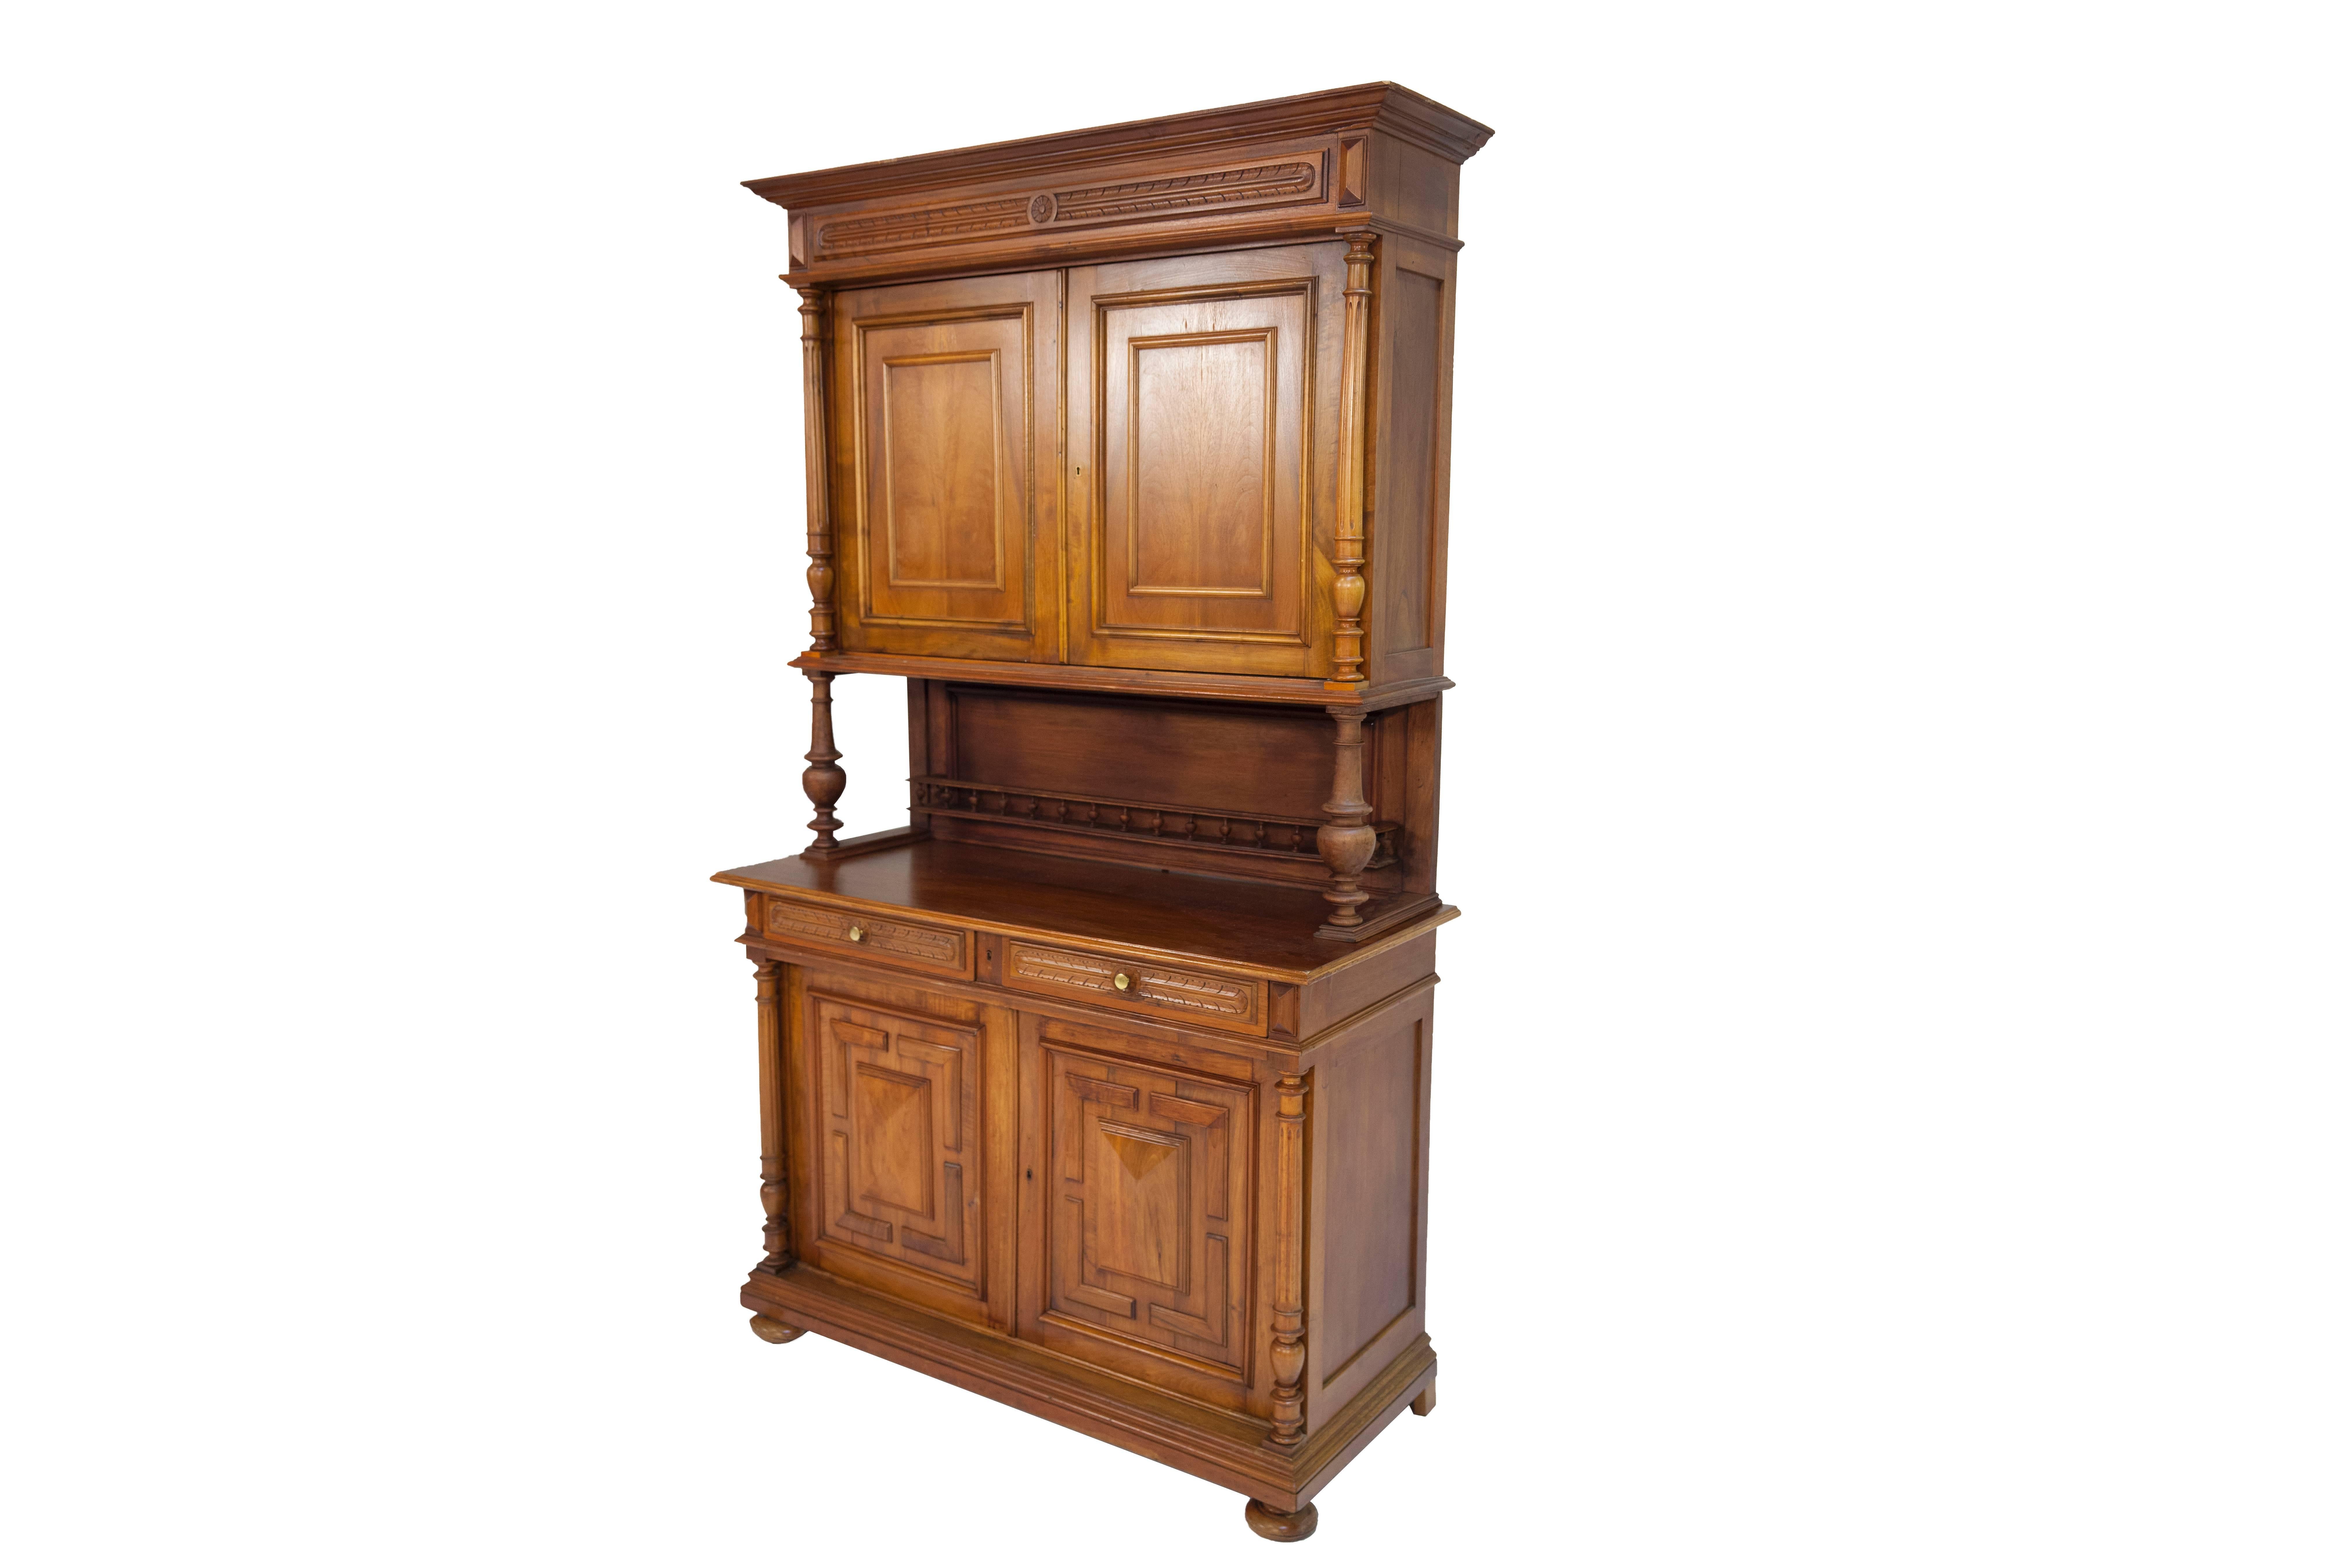 In very good condition. The credenza has two doors in its lower part with two drawers above; the panels set into the cut-outs of the doors in the lower part are double-coated with walnut and root wood and framed by profiled trims. Baluster columns